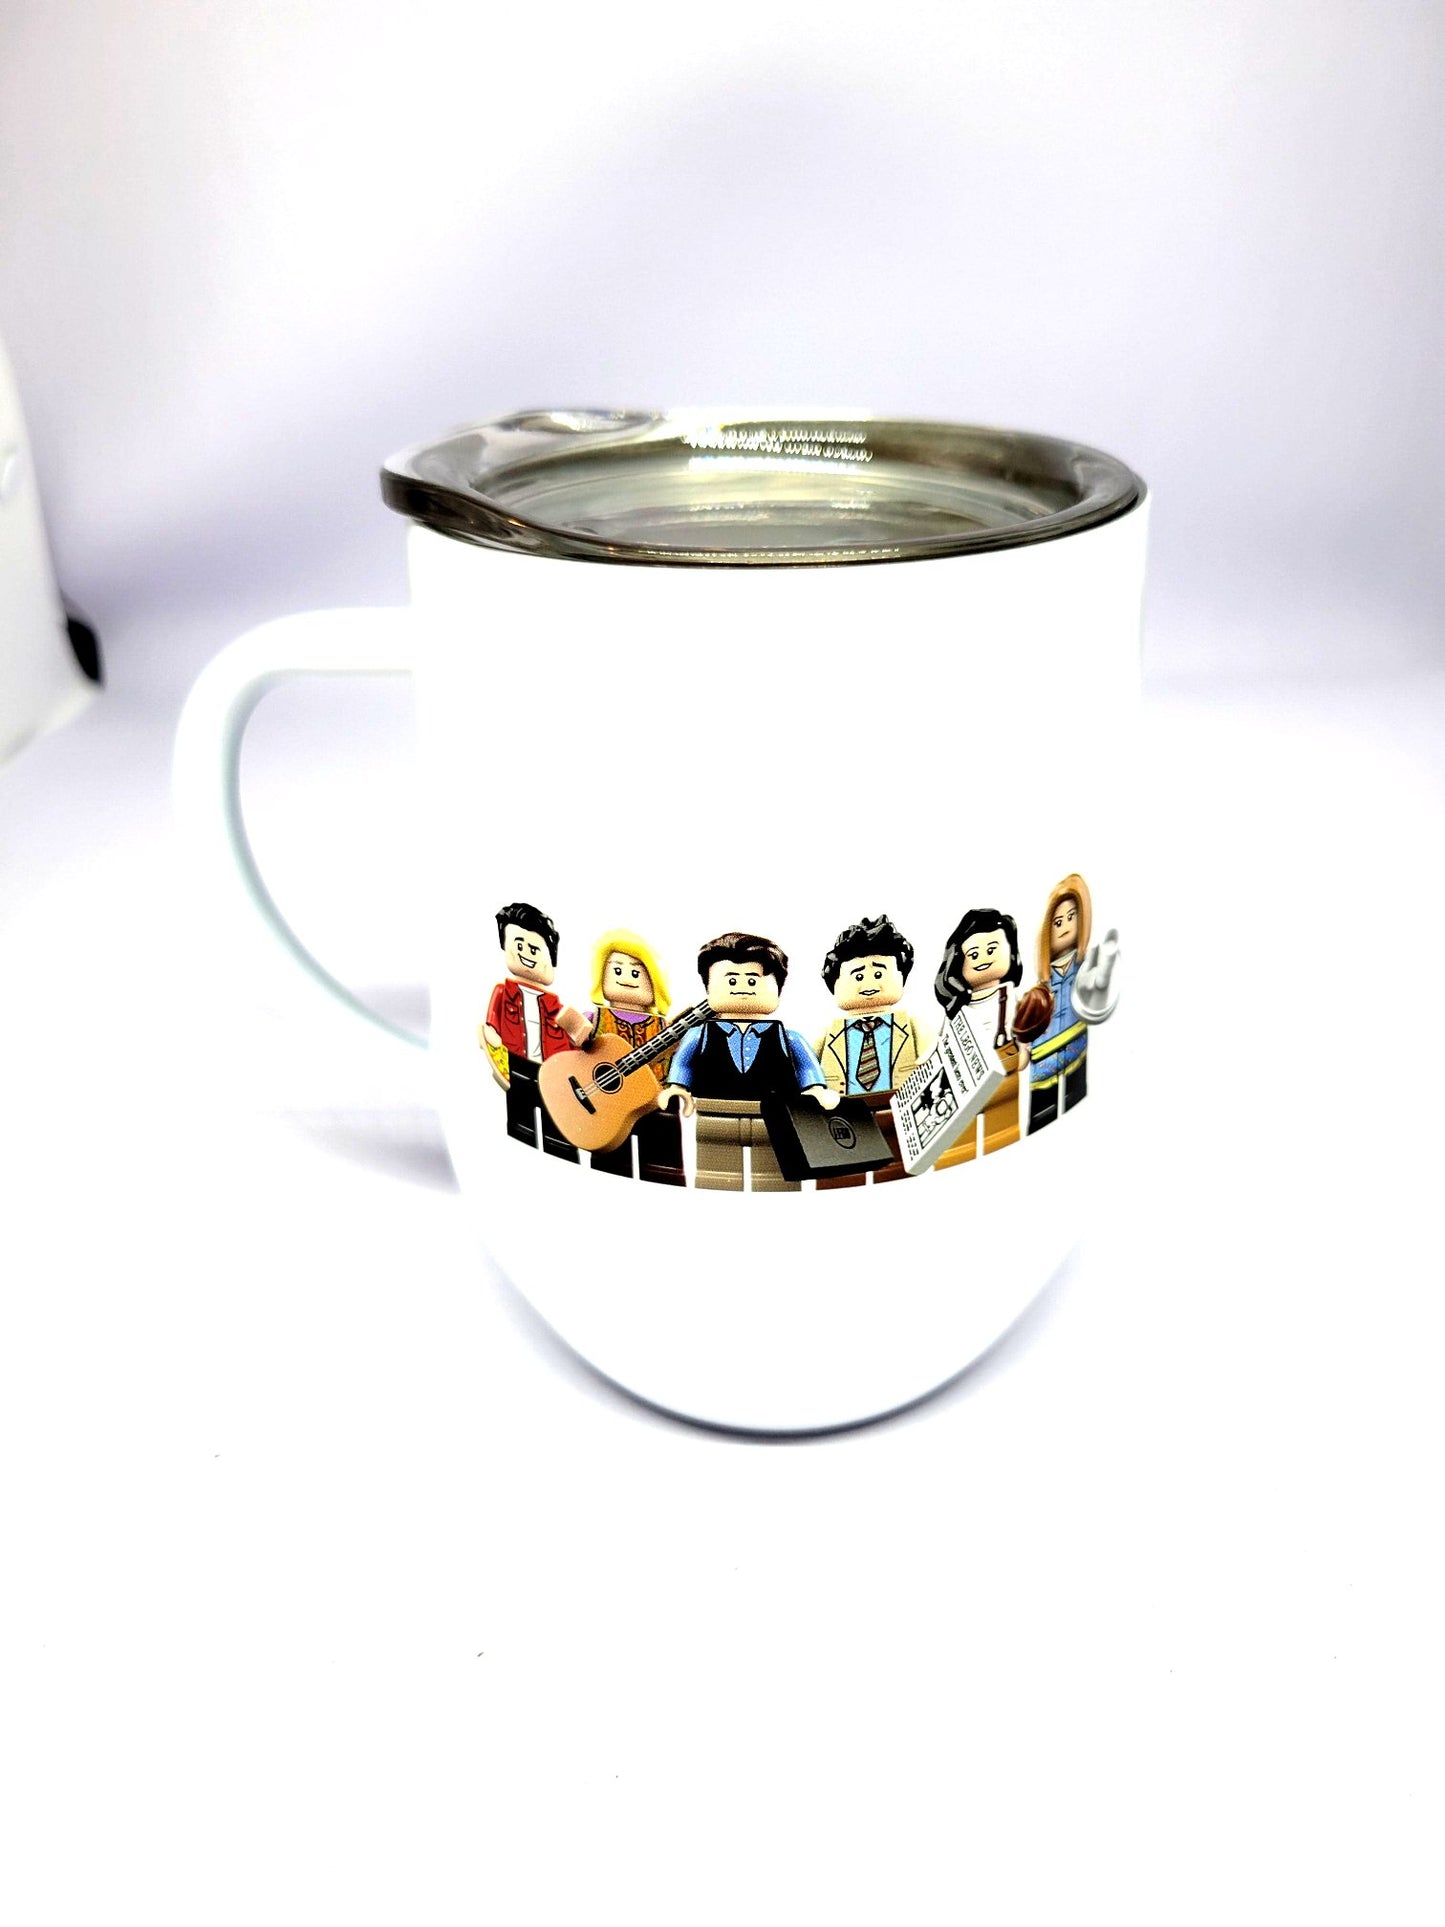 Lego Friends The Television Series Illustrated Mug